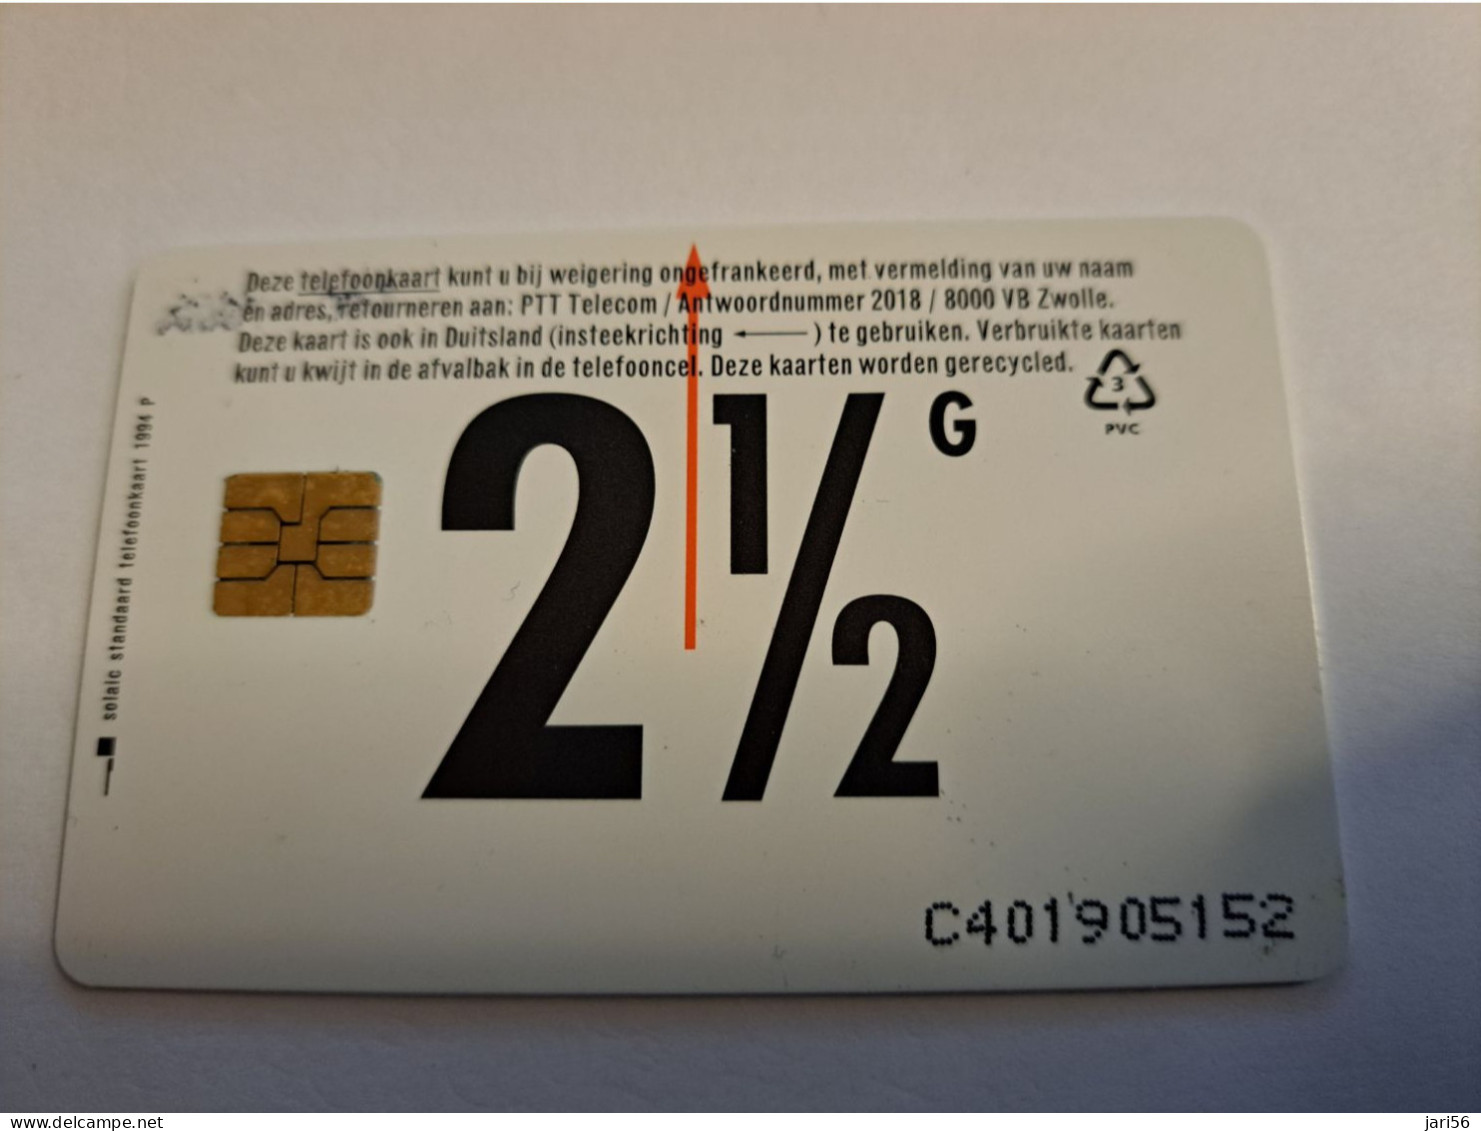 NETHERLANDS / FL 2,50 - CHIP CARD / CRDE 021 HERMAN BROOD  ONLY 1000X    / PRIVATE  MINT  ** 15927** - Schede GSM, Prepagate E Ricariche